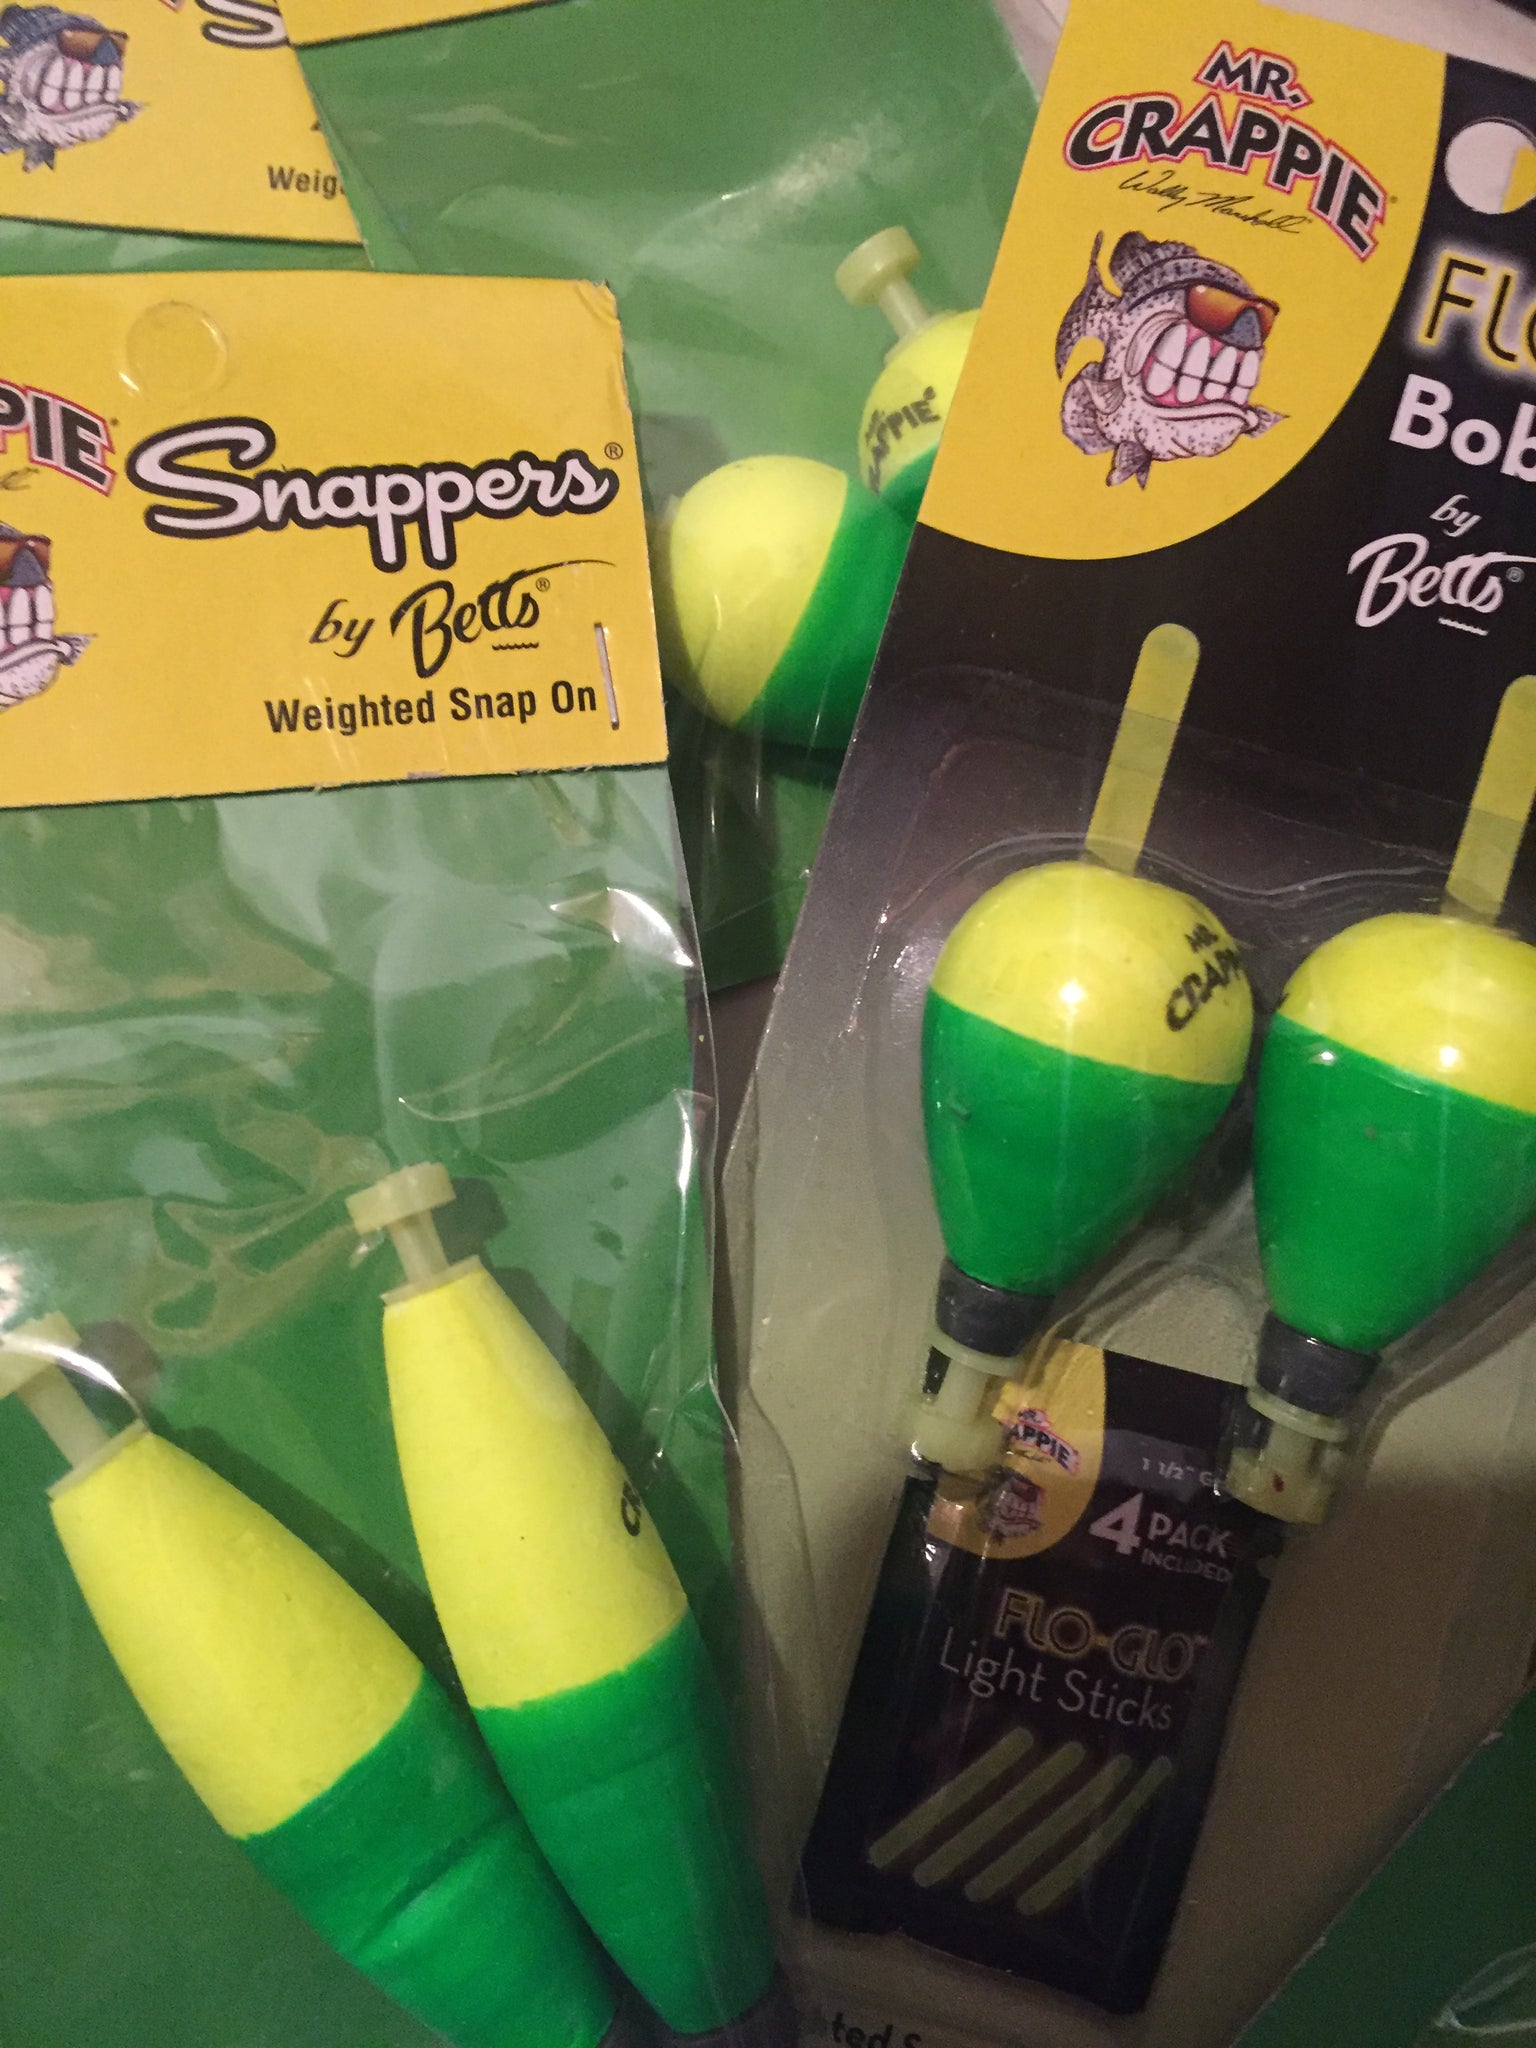 Mr. Crappie Flo-Glo Lighted Cigar Bobbers